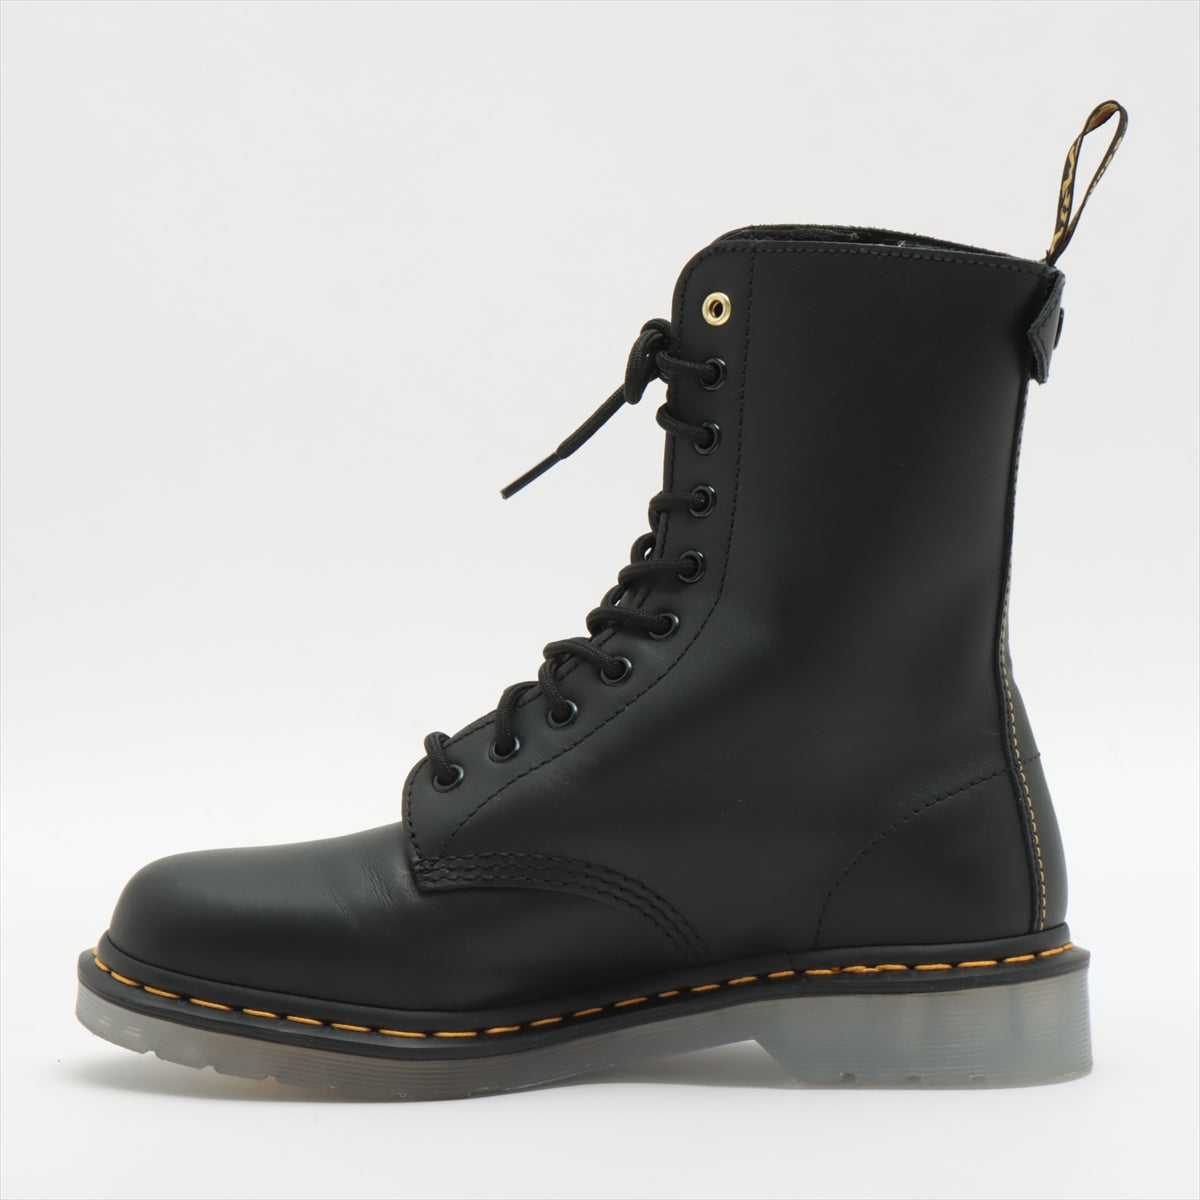 Dr. Martens x Yohji Yamamoto 22SS Leather Boots UK8 Men's Black 1490 Hidden Zip YY There is a box